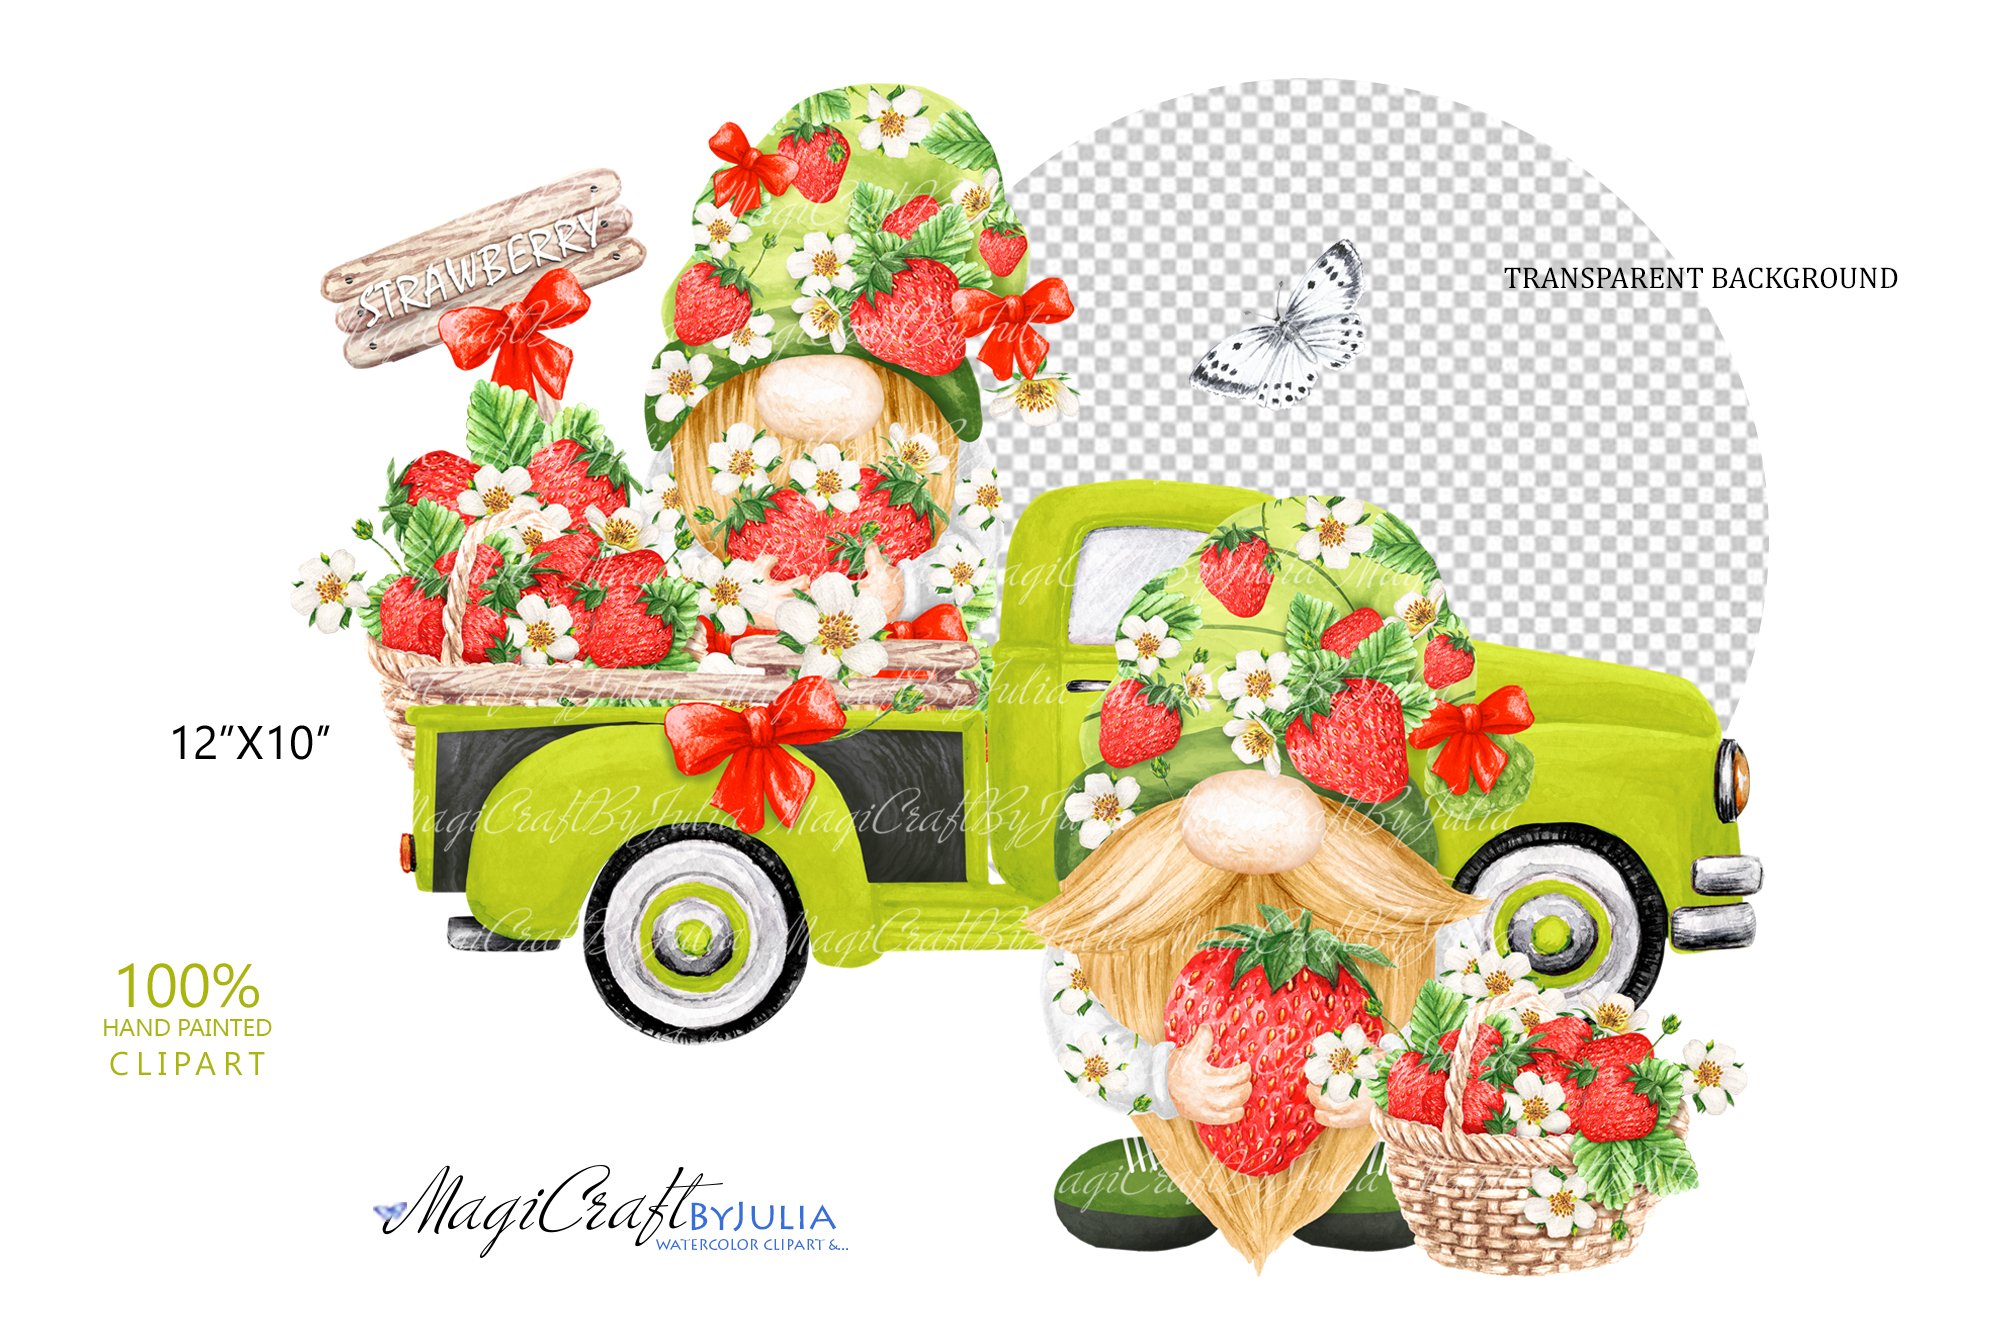 Illustration of a gnome in a truck with strawberries on a transparent background.